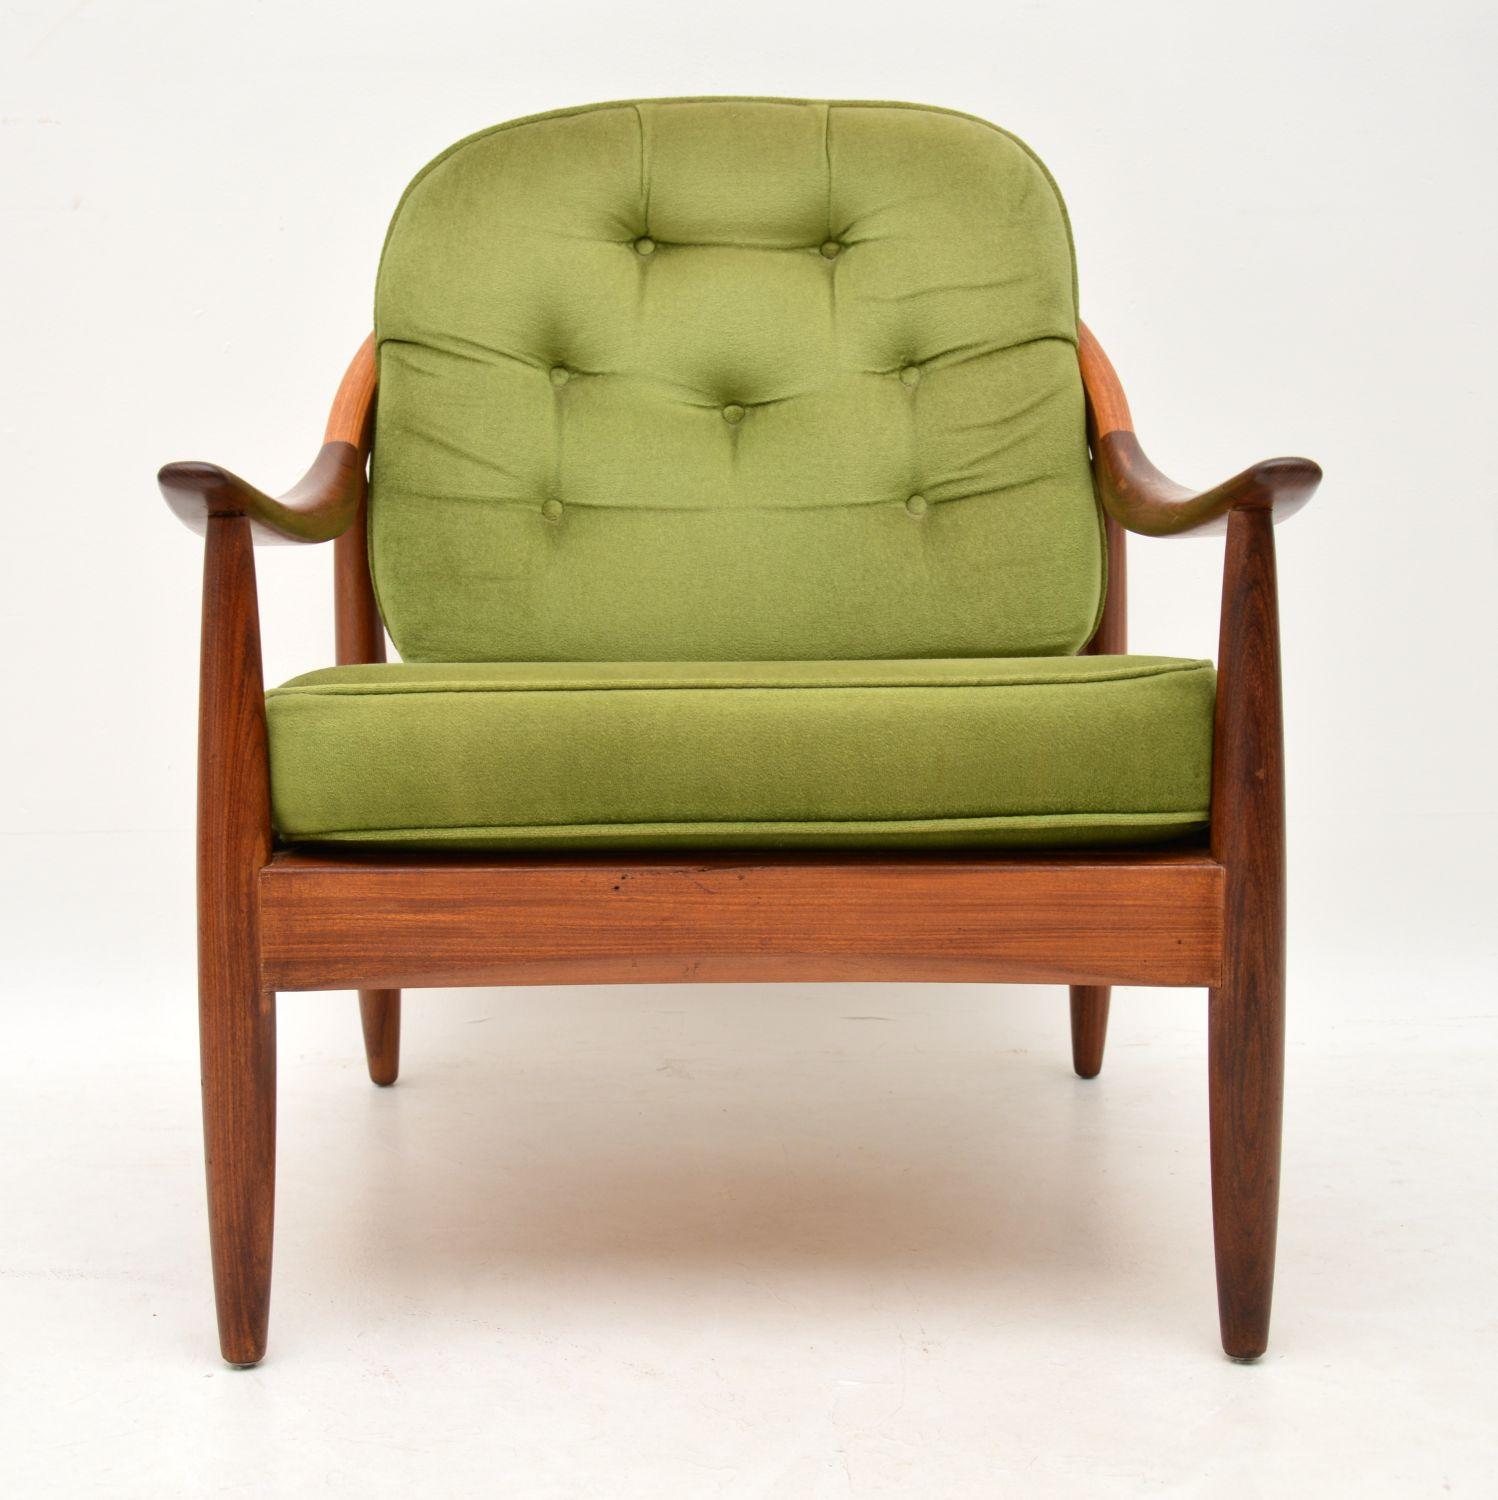 A beautiful vintage armchair in solid afromosia, this was made by Greaves & Thomas, it dates from the 1960s. The condition is great for its age, the frame is very clean, sturdy and sound, we have given it a clean and fresh coat of oil. At some stage